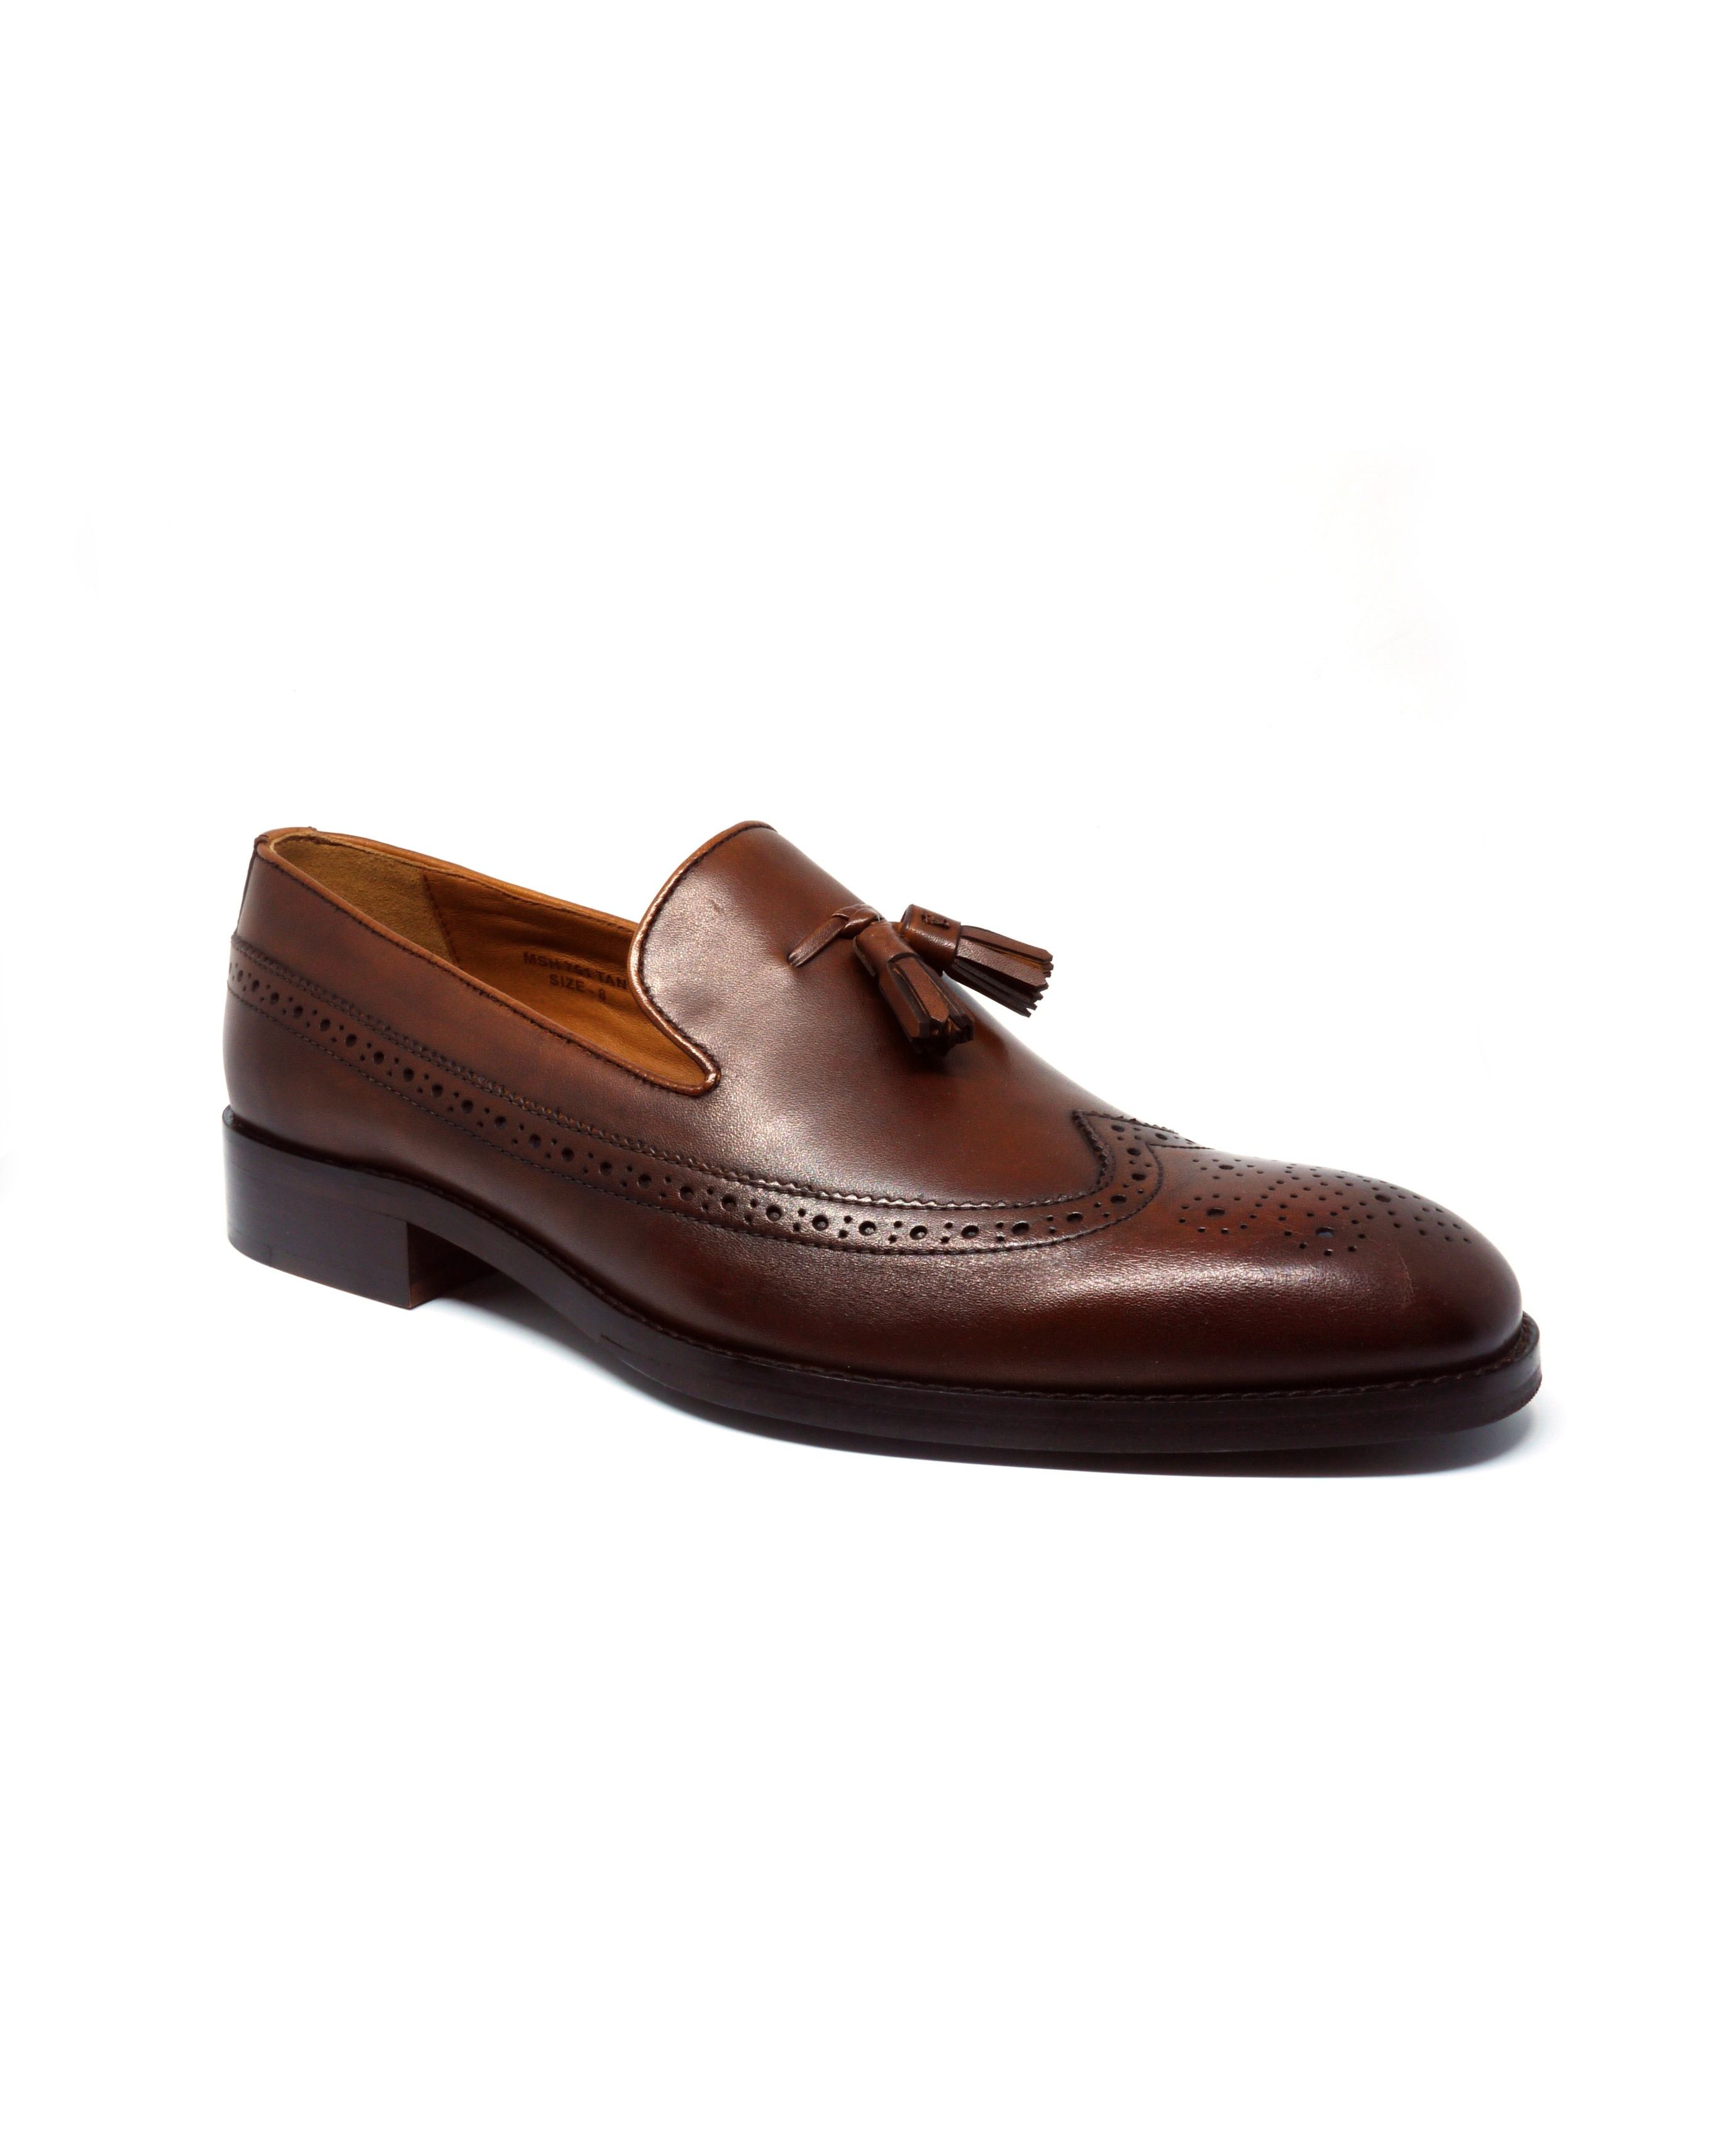 Men's Chocolate Brown Leather Tasselled Loafers | Savile Row Co